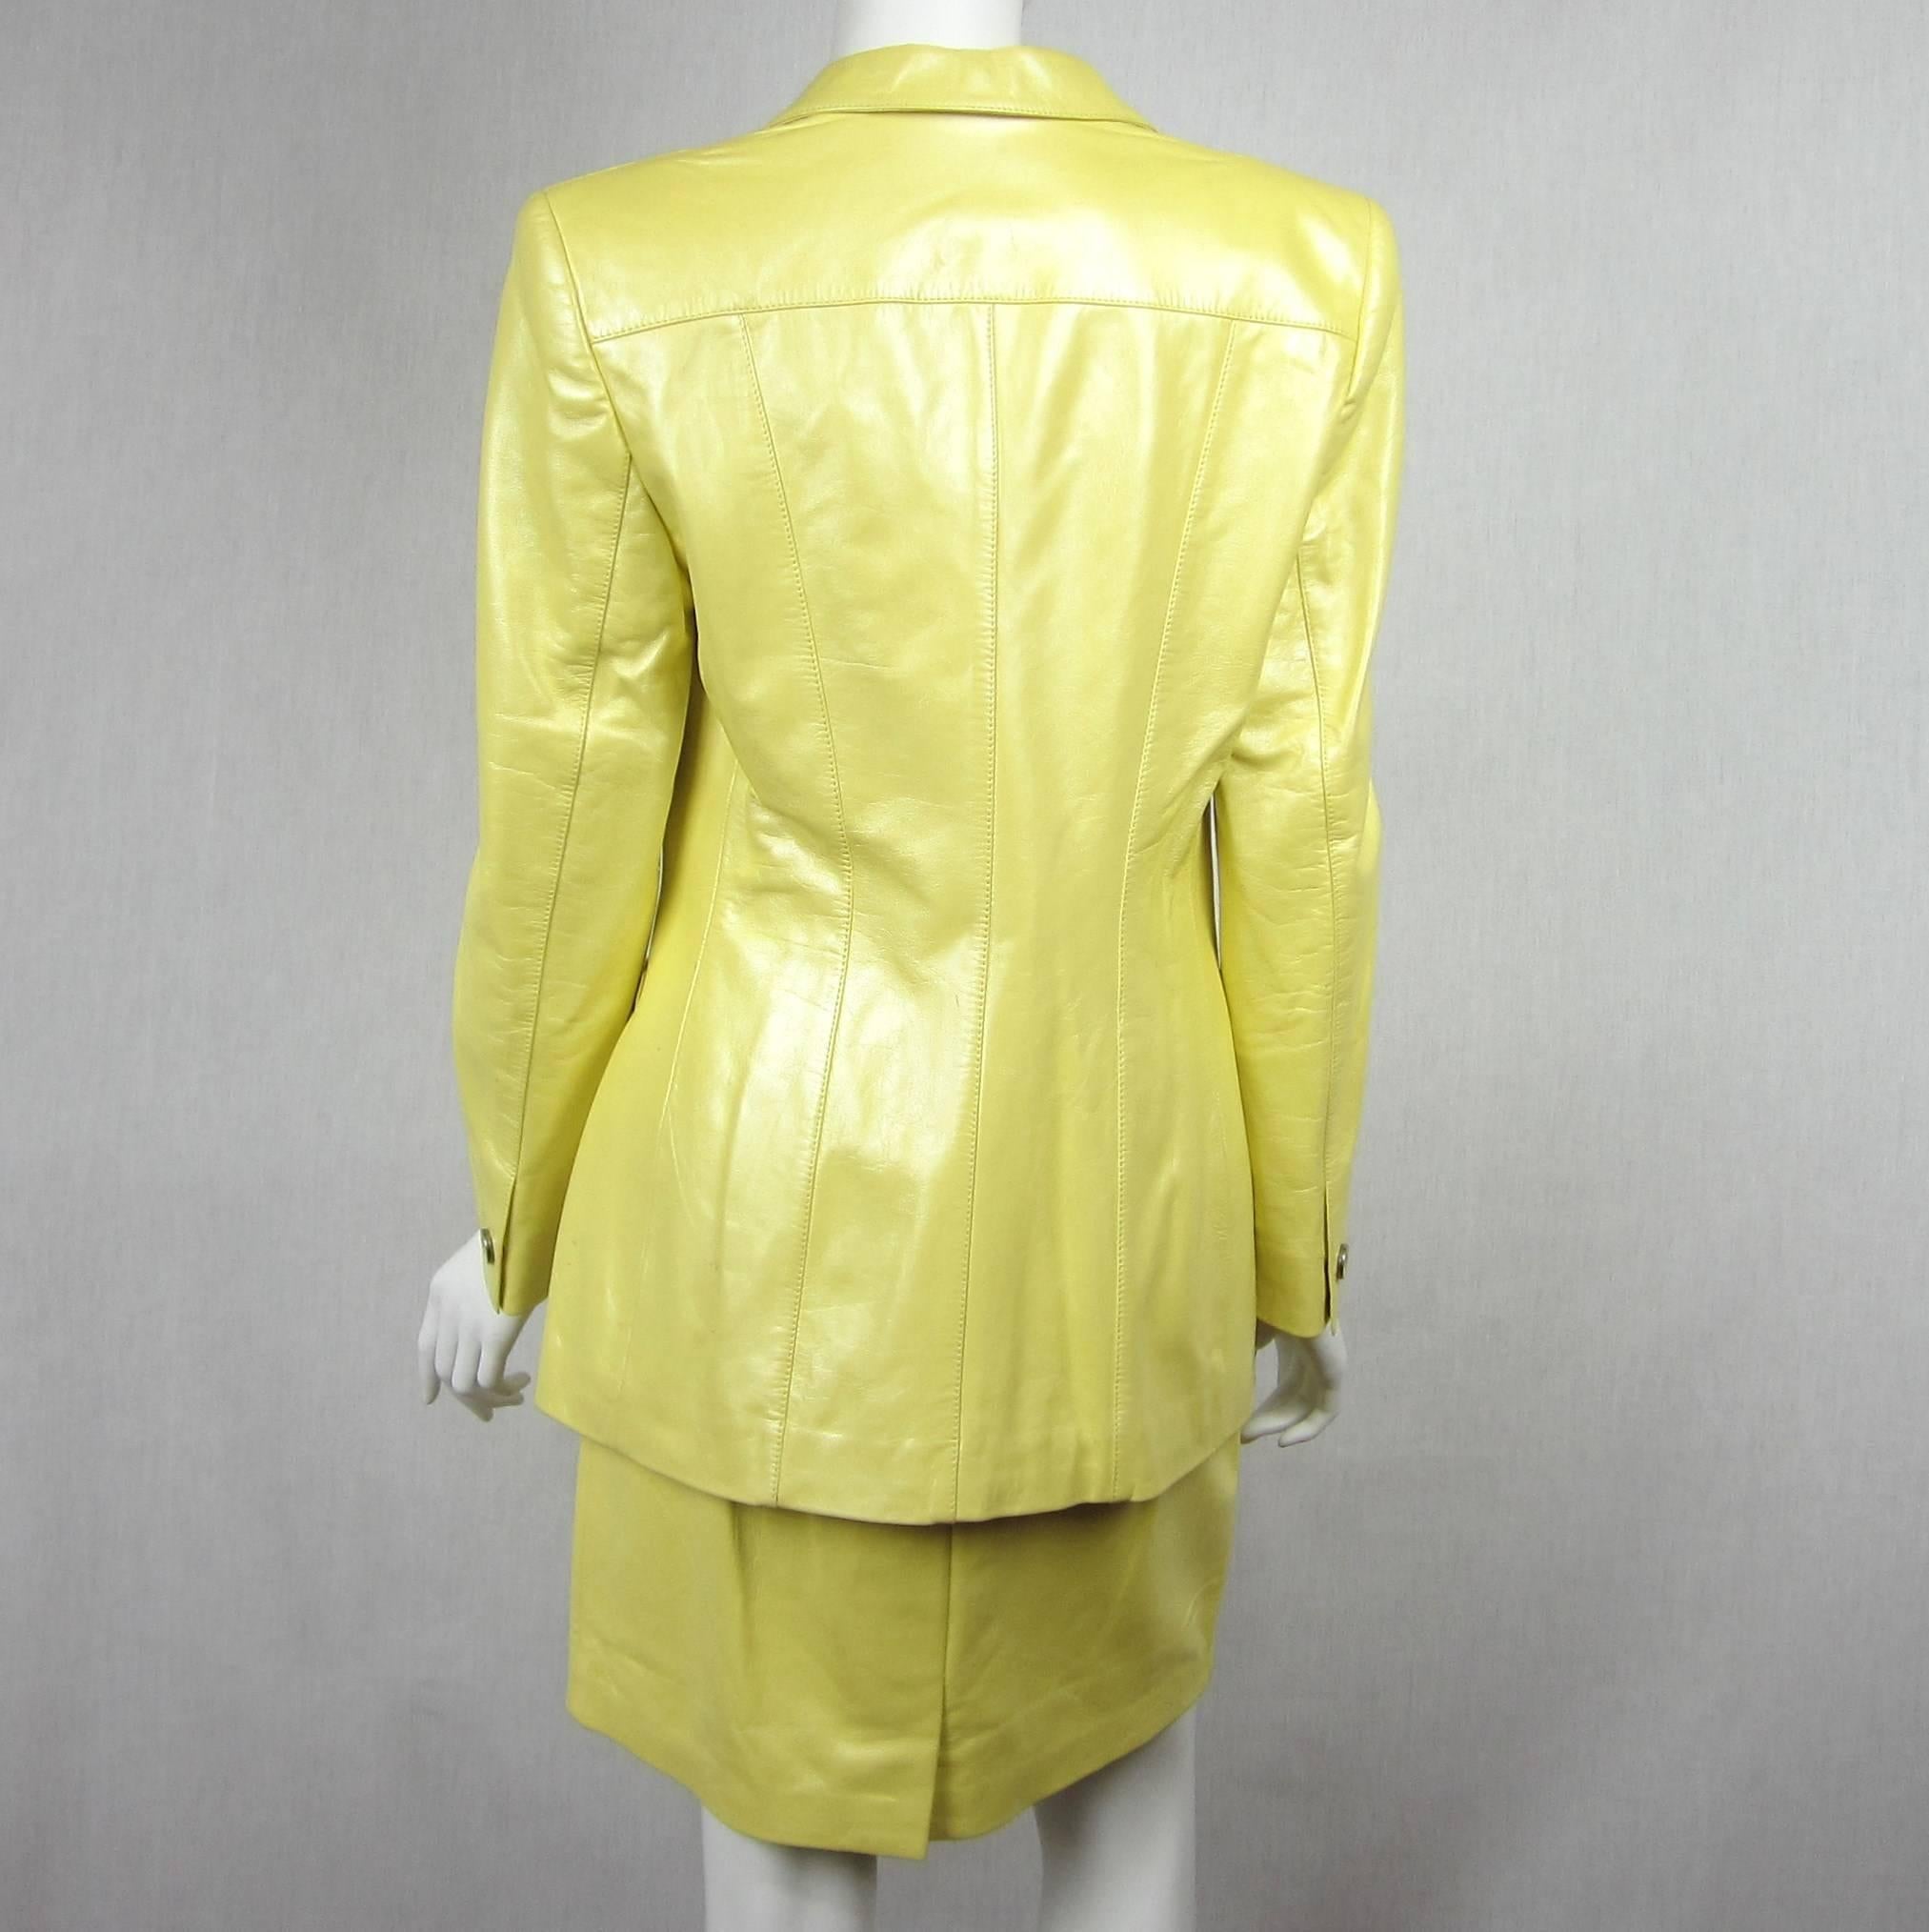 AMAZING SUIT in a more amazing color! Escada  NEW OLD STOCK Price tags still attached. Escada PEARL Yellow Leather Fitted Jacket and Skirt. Zippered skirt with slit pockets, kick pleat in the back. Great cut on this as well. The price of this was